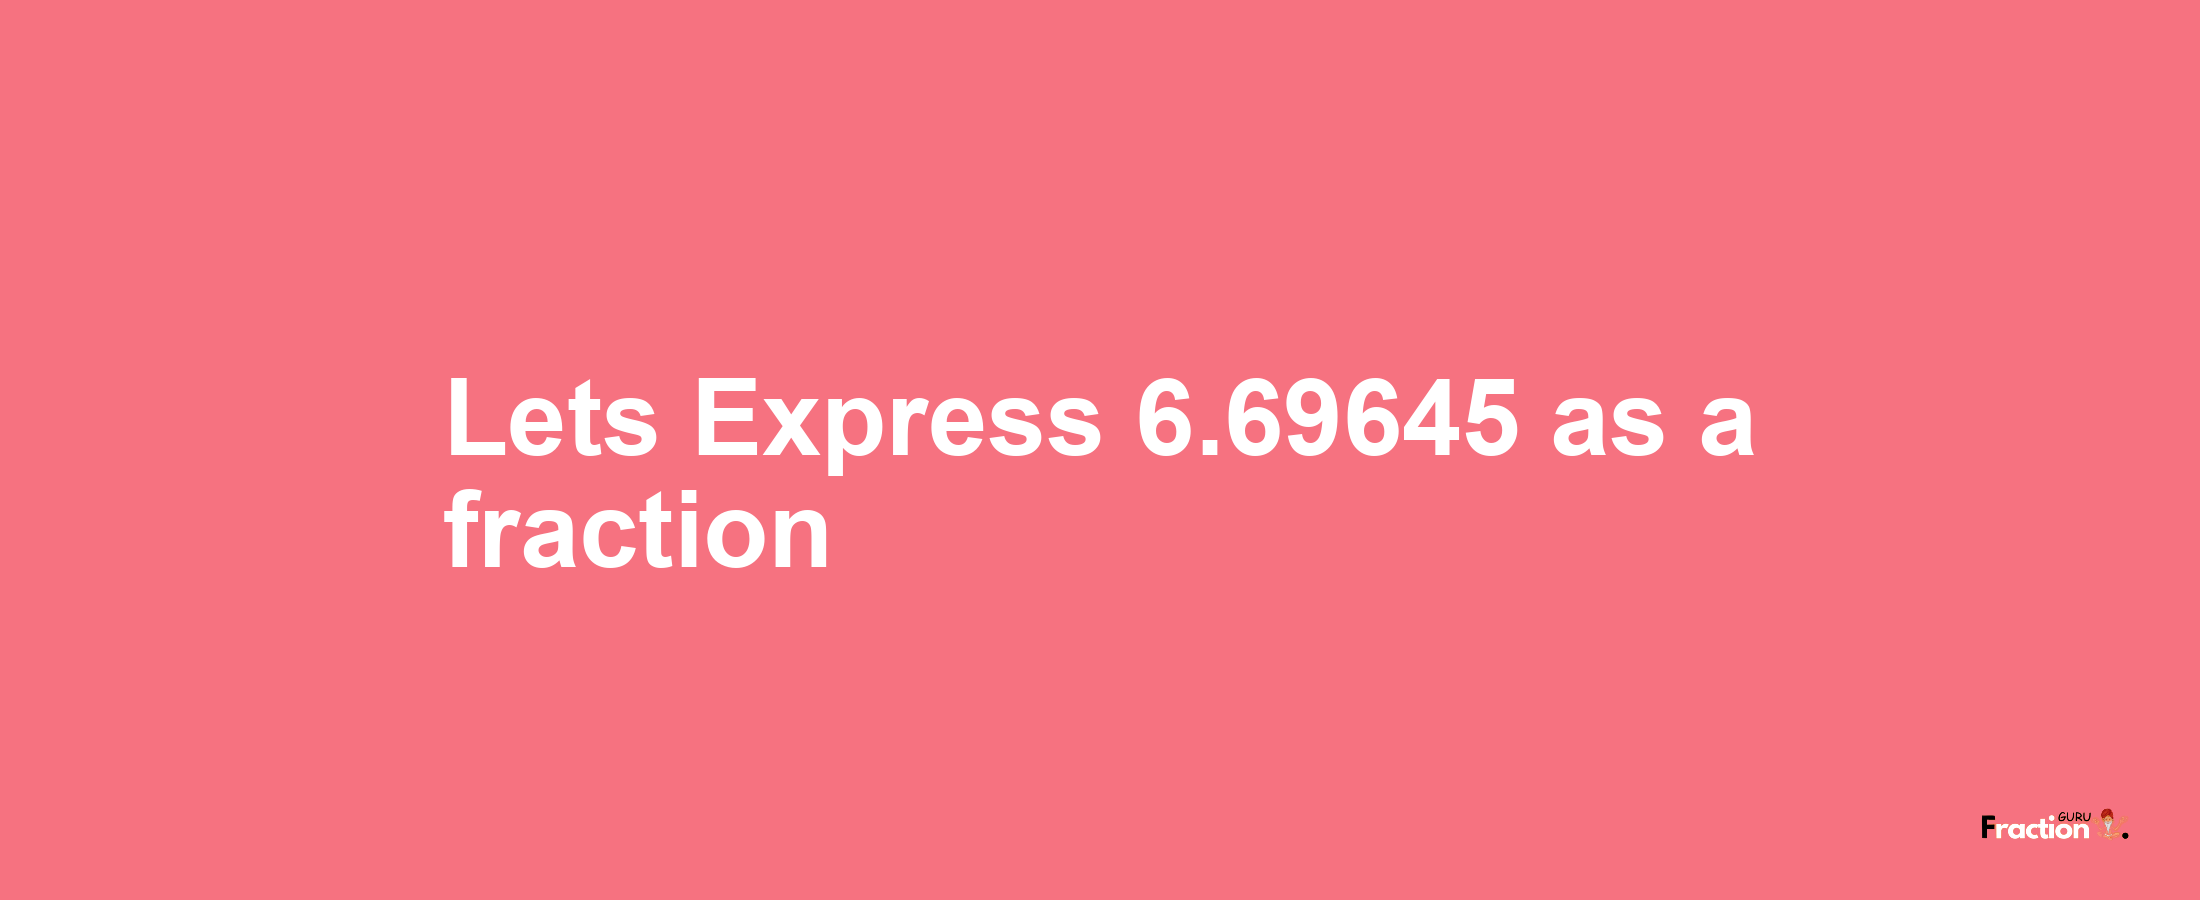 Lets Express 6.69645 as afraction